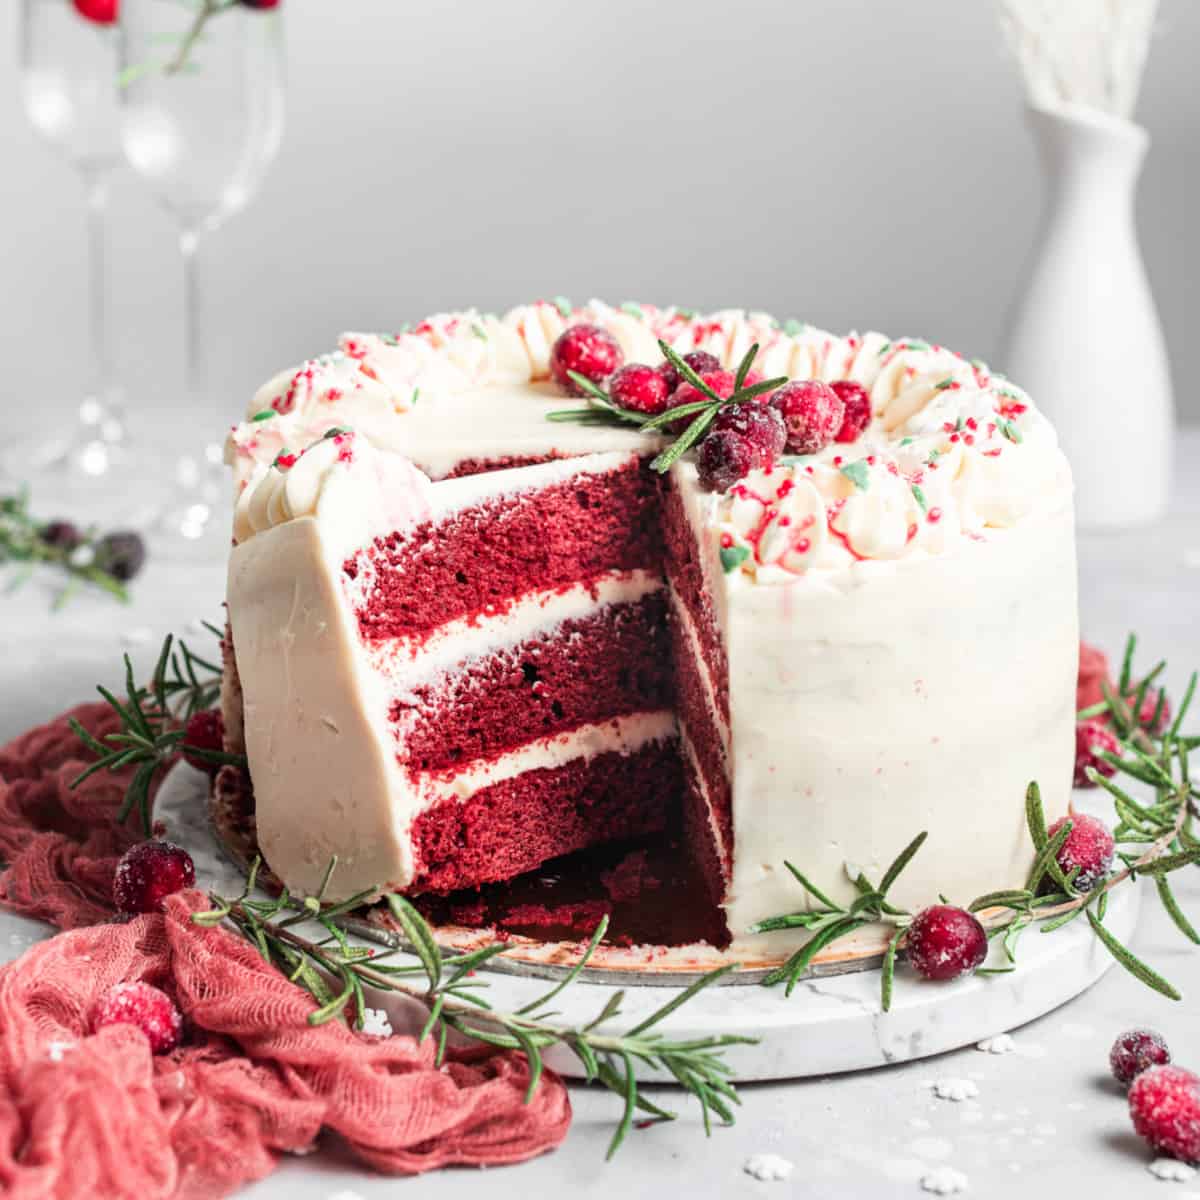 Unique red velvet cake decor ideas to make your cake stand out